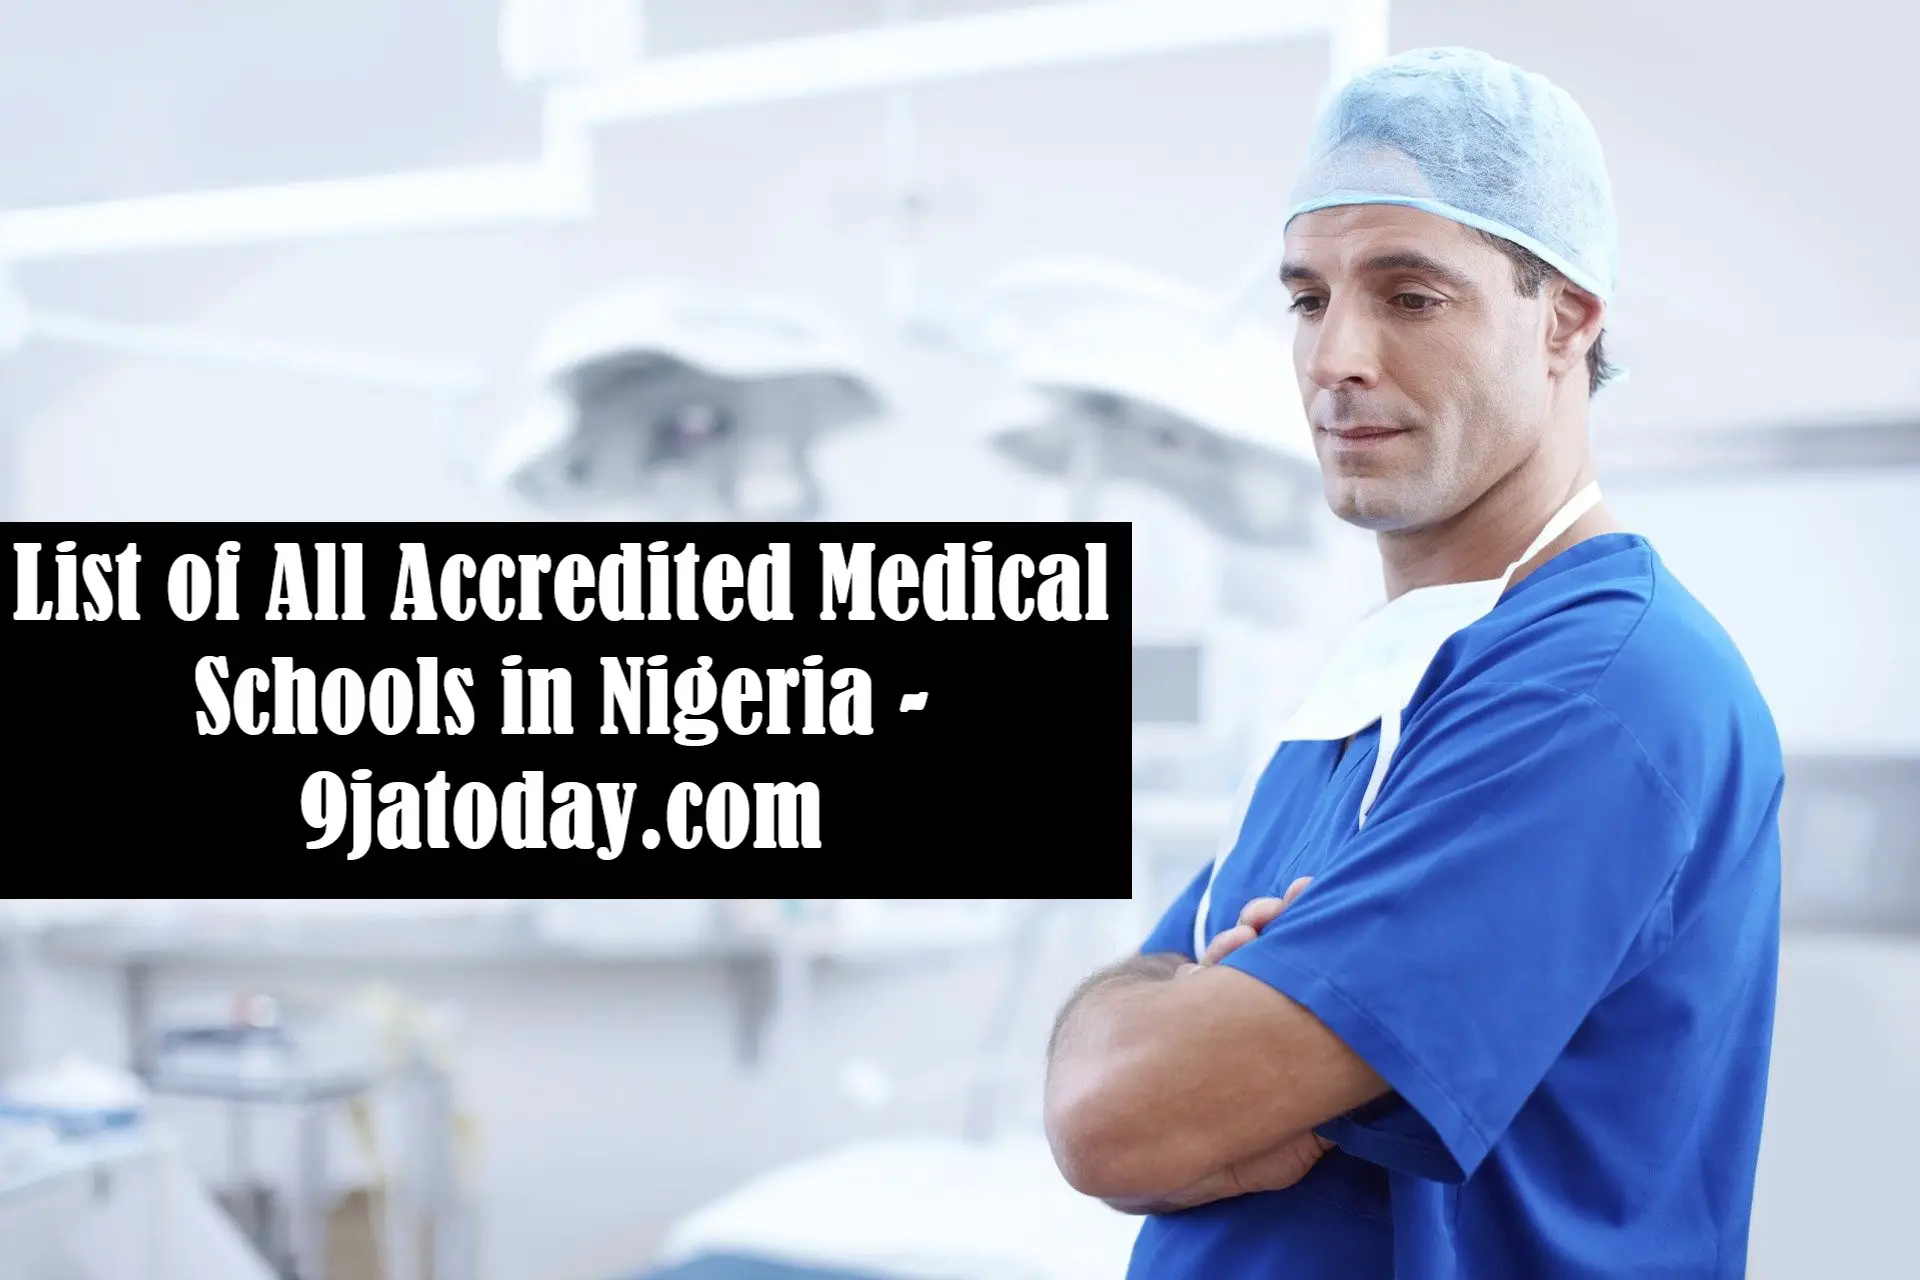 List of All Accredited Medical Schools in Nigeria